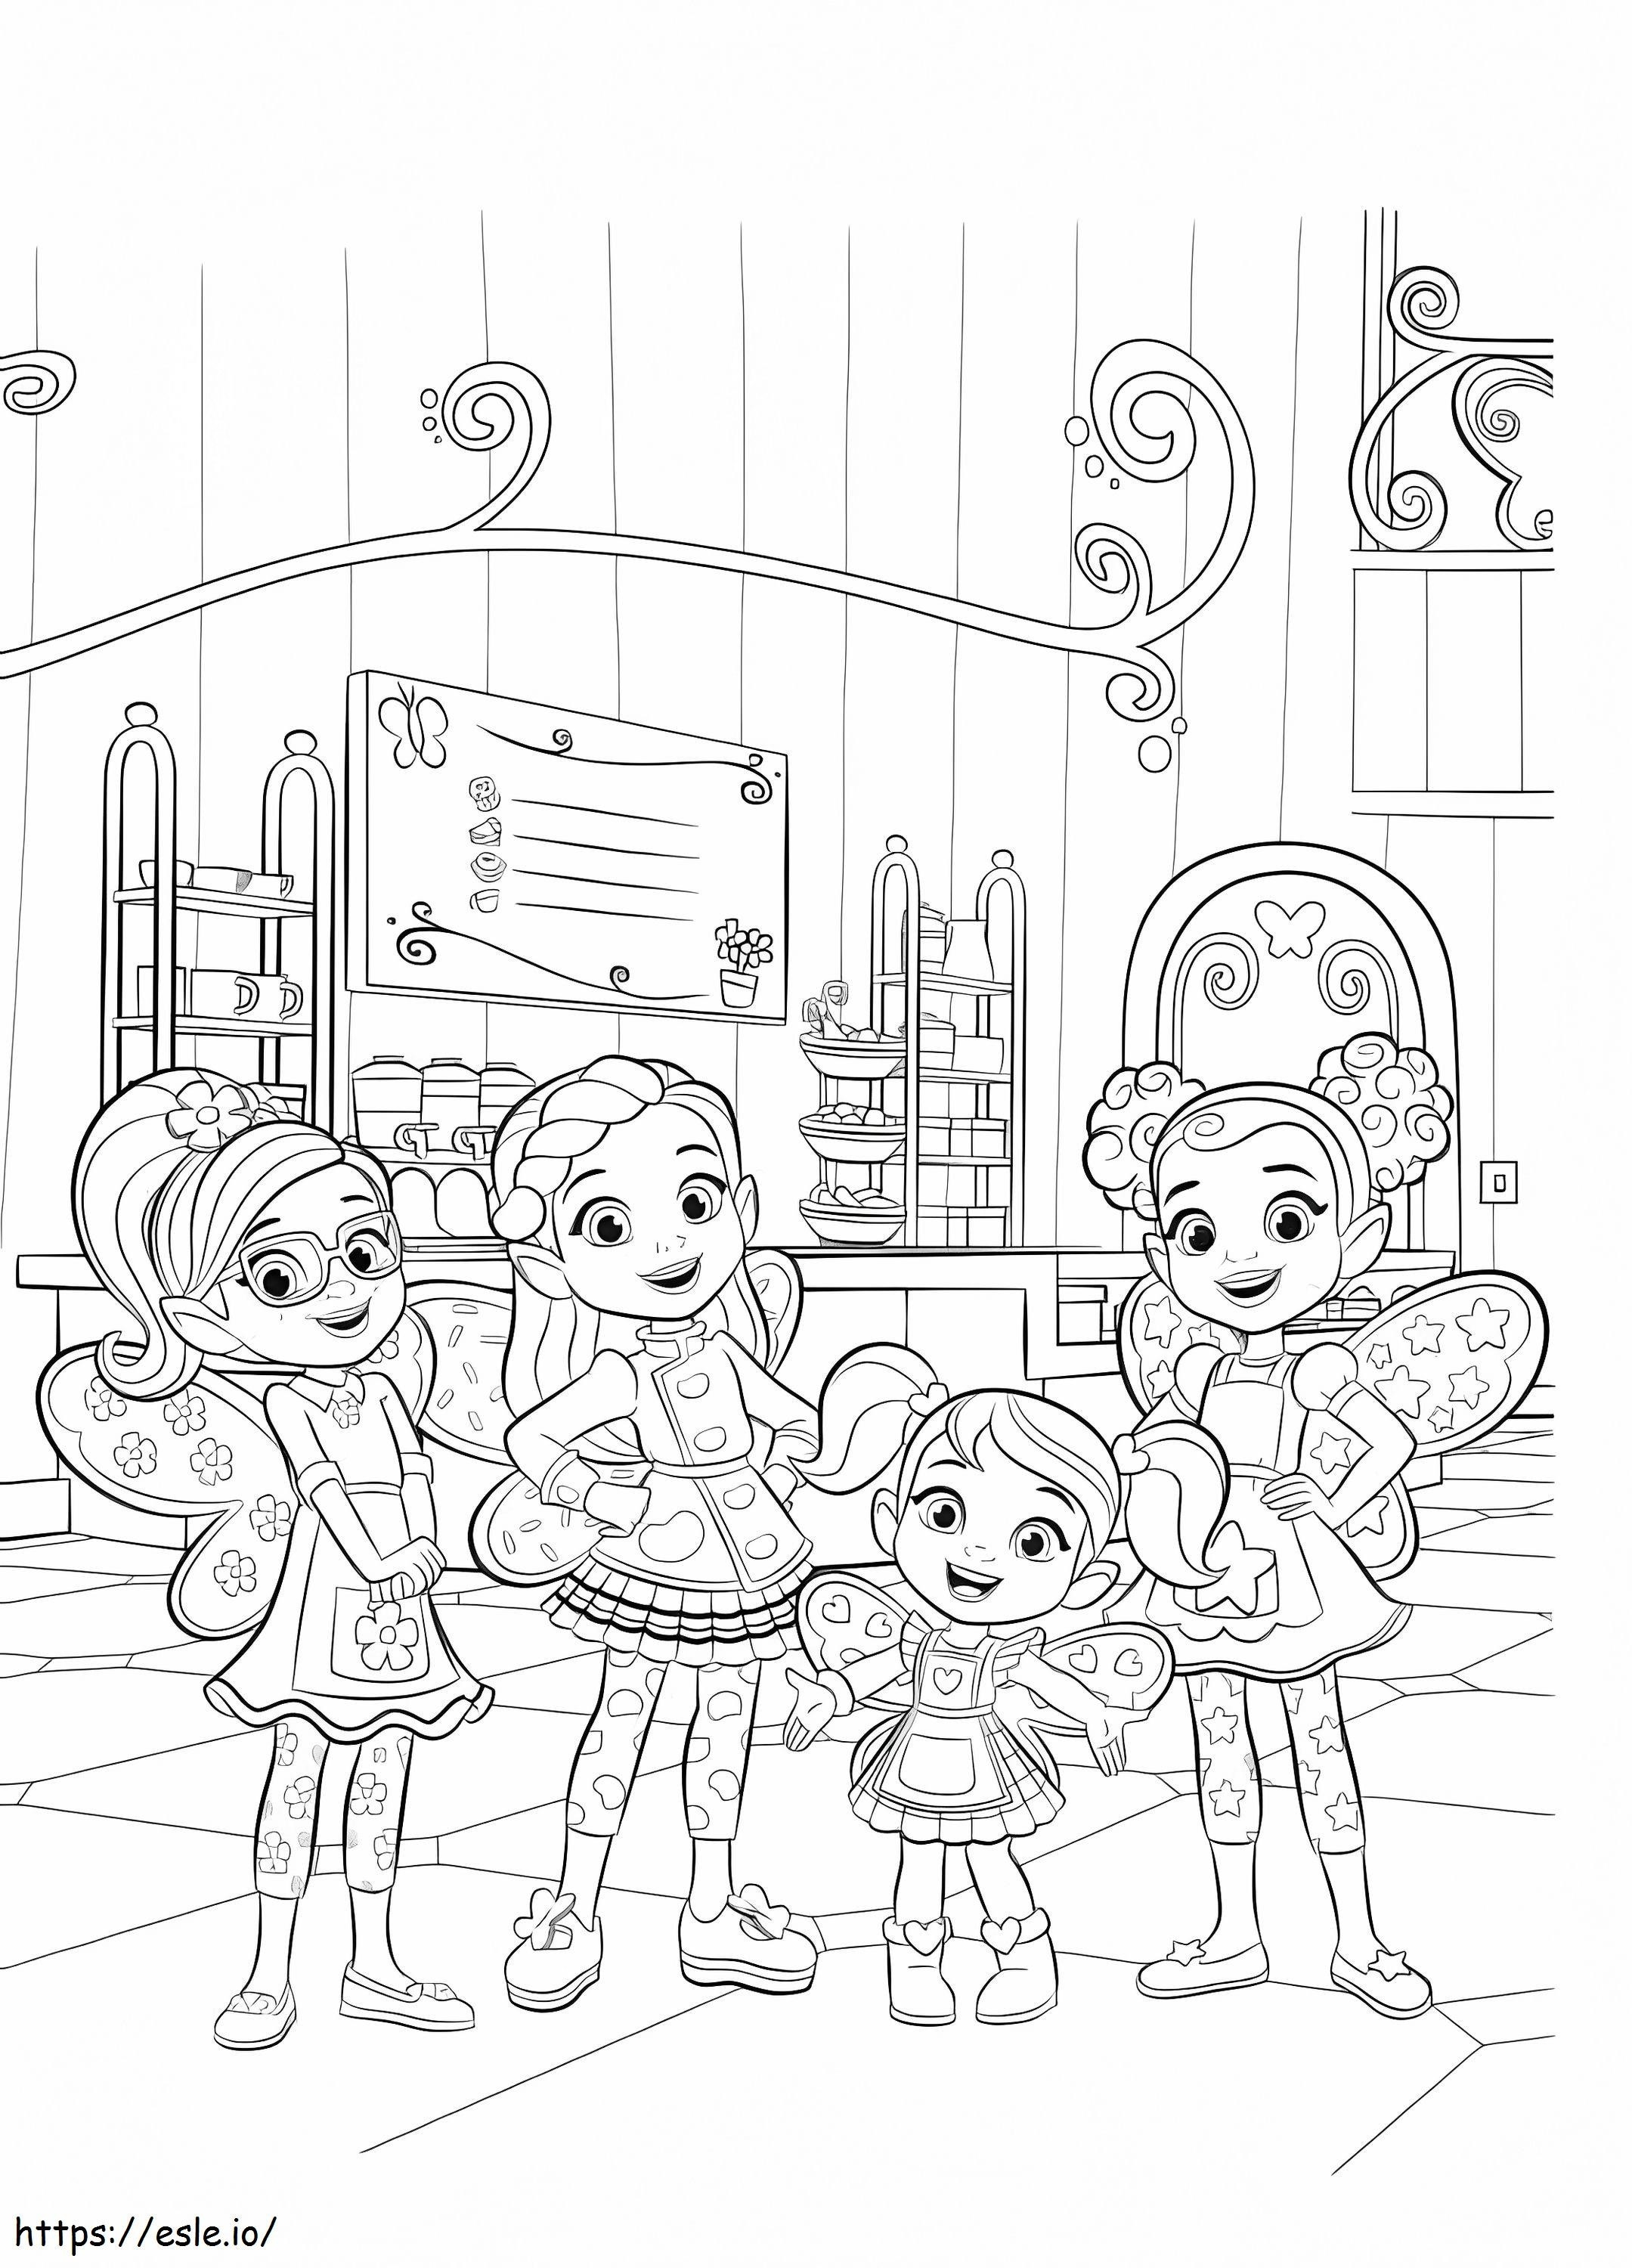 Characters From Butterbeans Cafe 1 coloring page